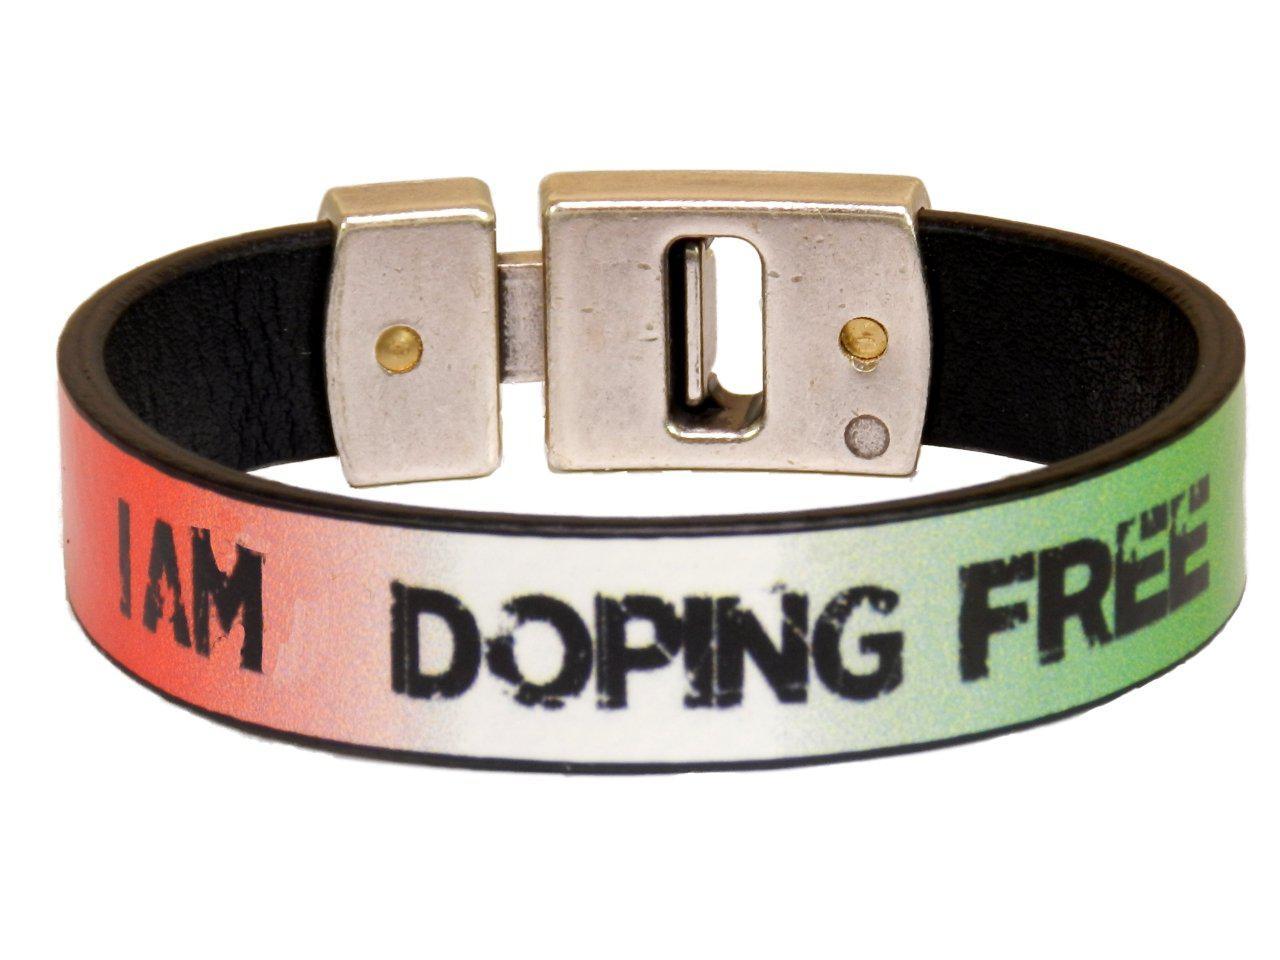 MAN'S BRACELET I AM DOPING FREE BY PAUL MECCANICO WITH ITALIAN FLAG - Limited Edition Paul Meccanico